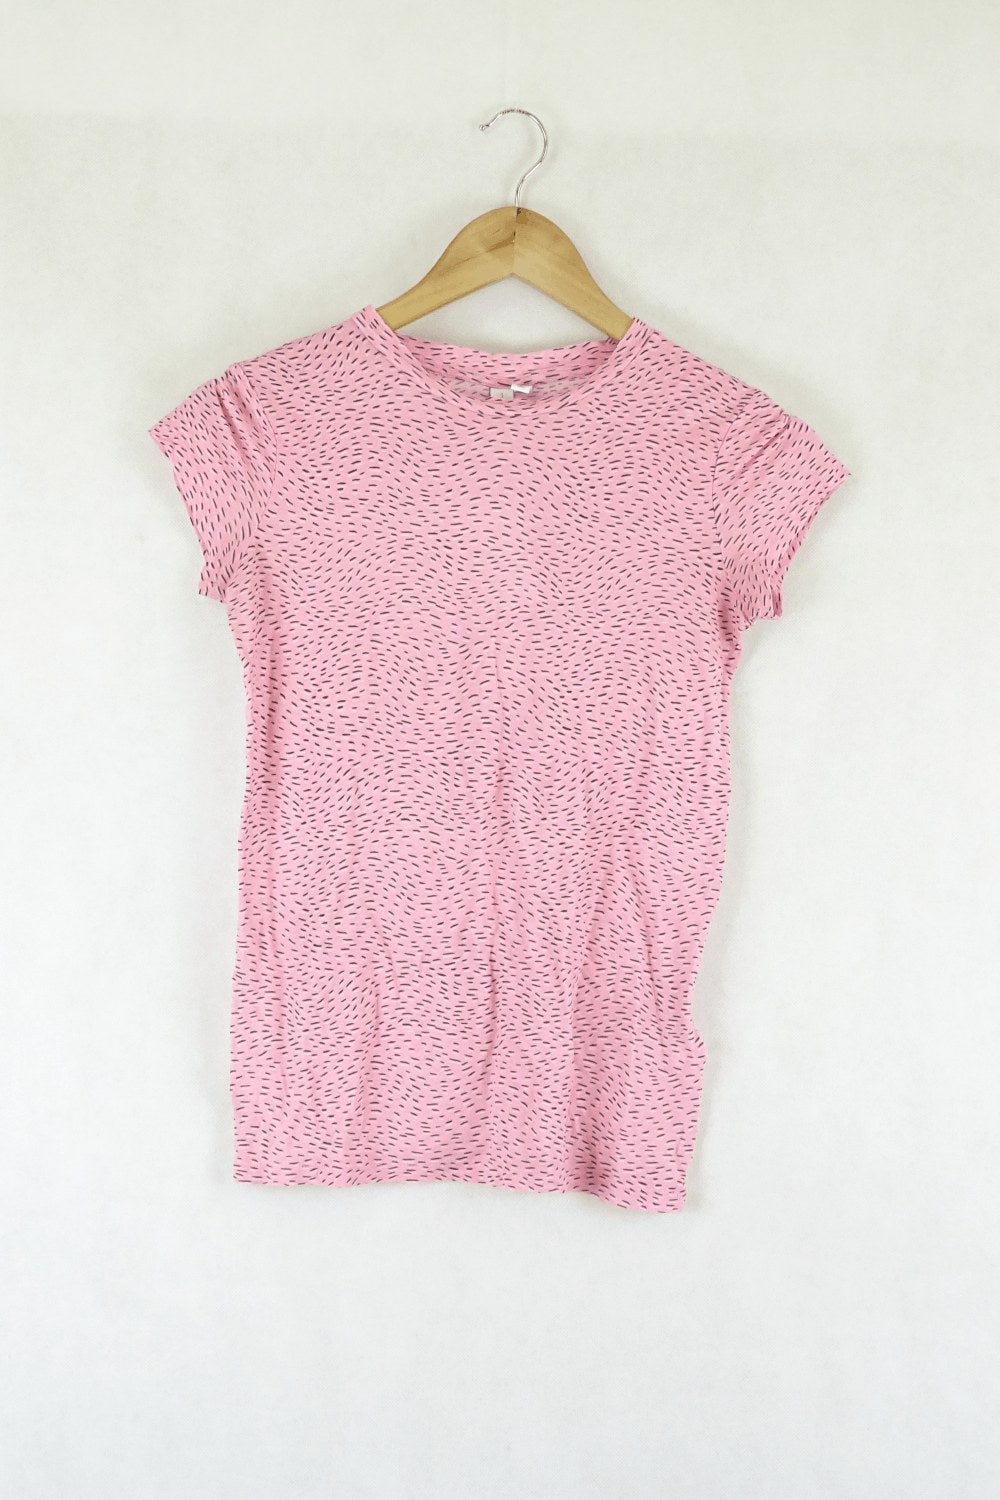 & Other Stories Pink Pattern Top 4